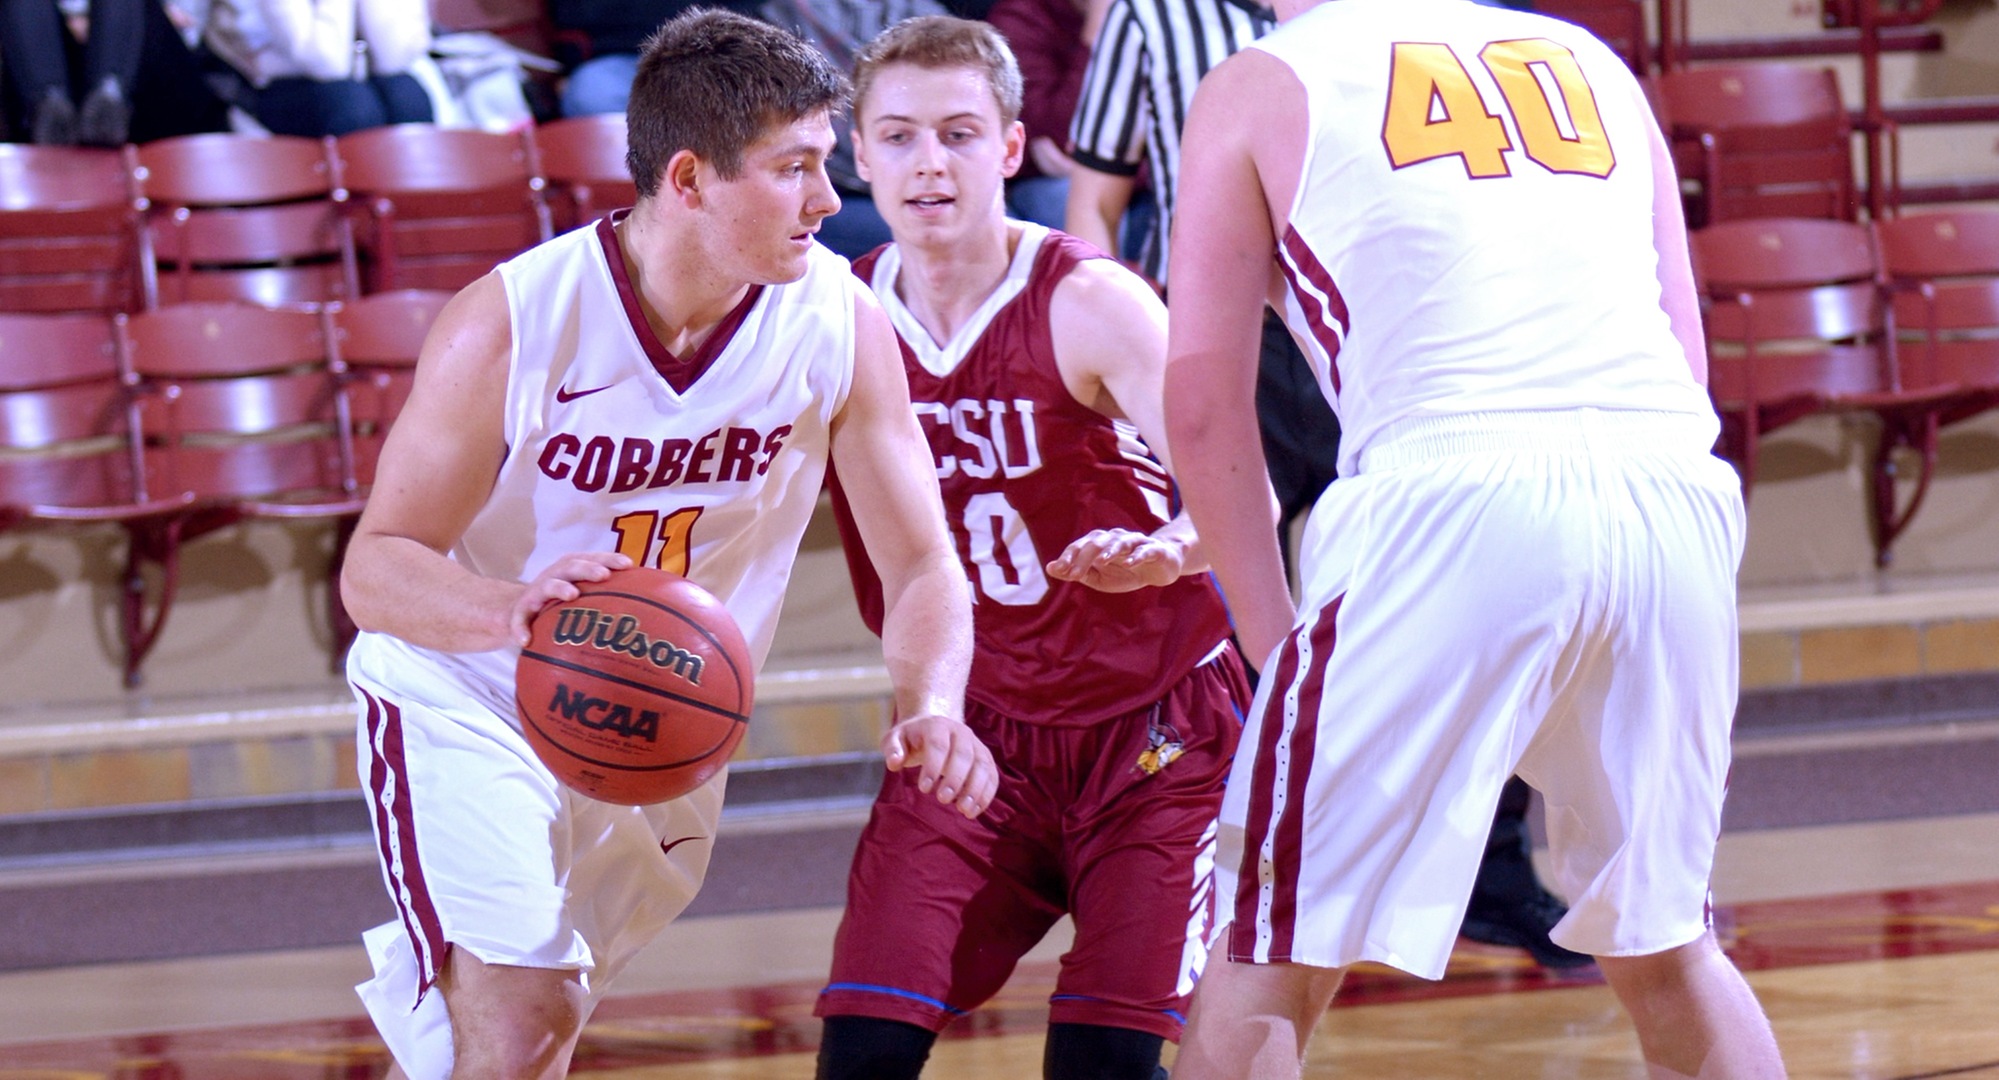 Senior Dylan Alderman drives to the basket in the Cobbers' overtime win against Valley City State. Alderman tied his career high with 27 points.